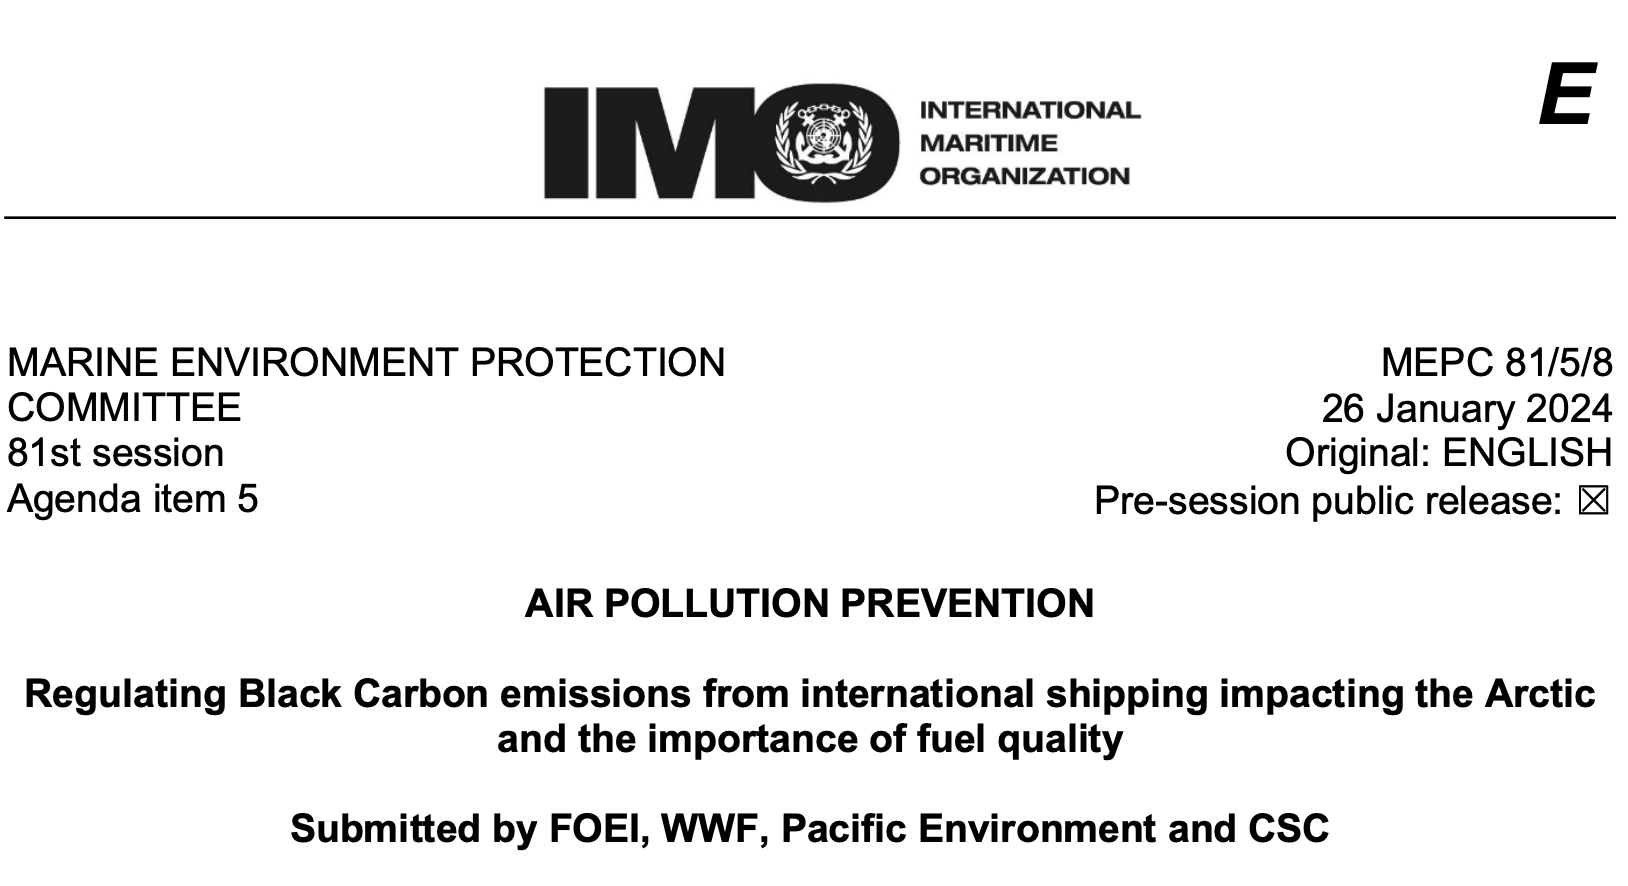 MEPC 81/5/8 Regulating Black Carbon emissions from international shipping impacting the Arctic and the importance of fuel quality